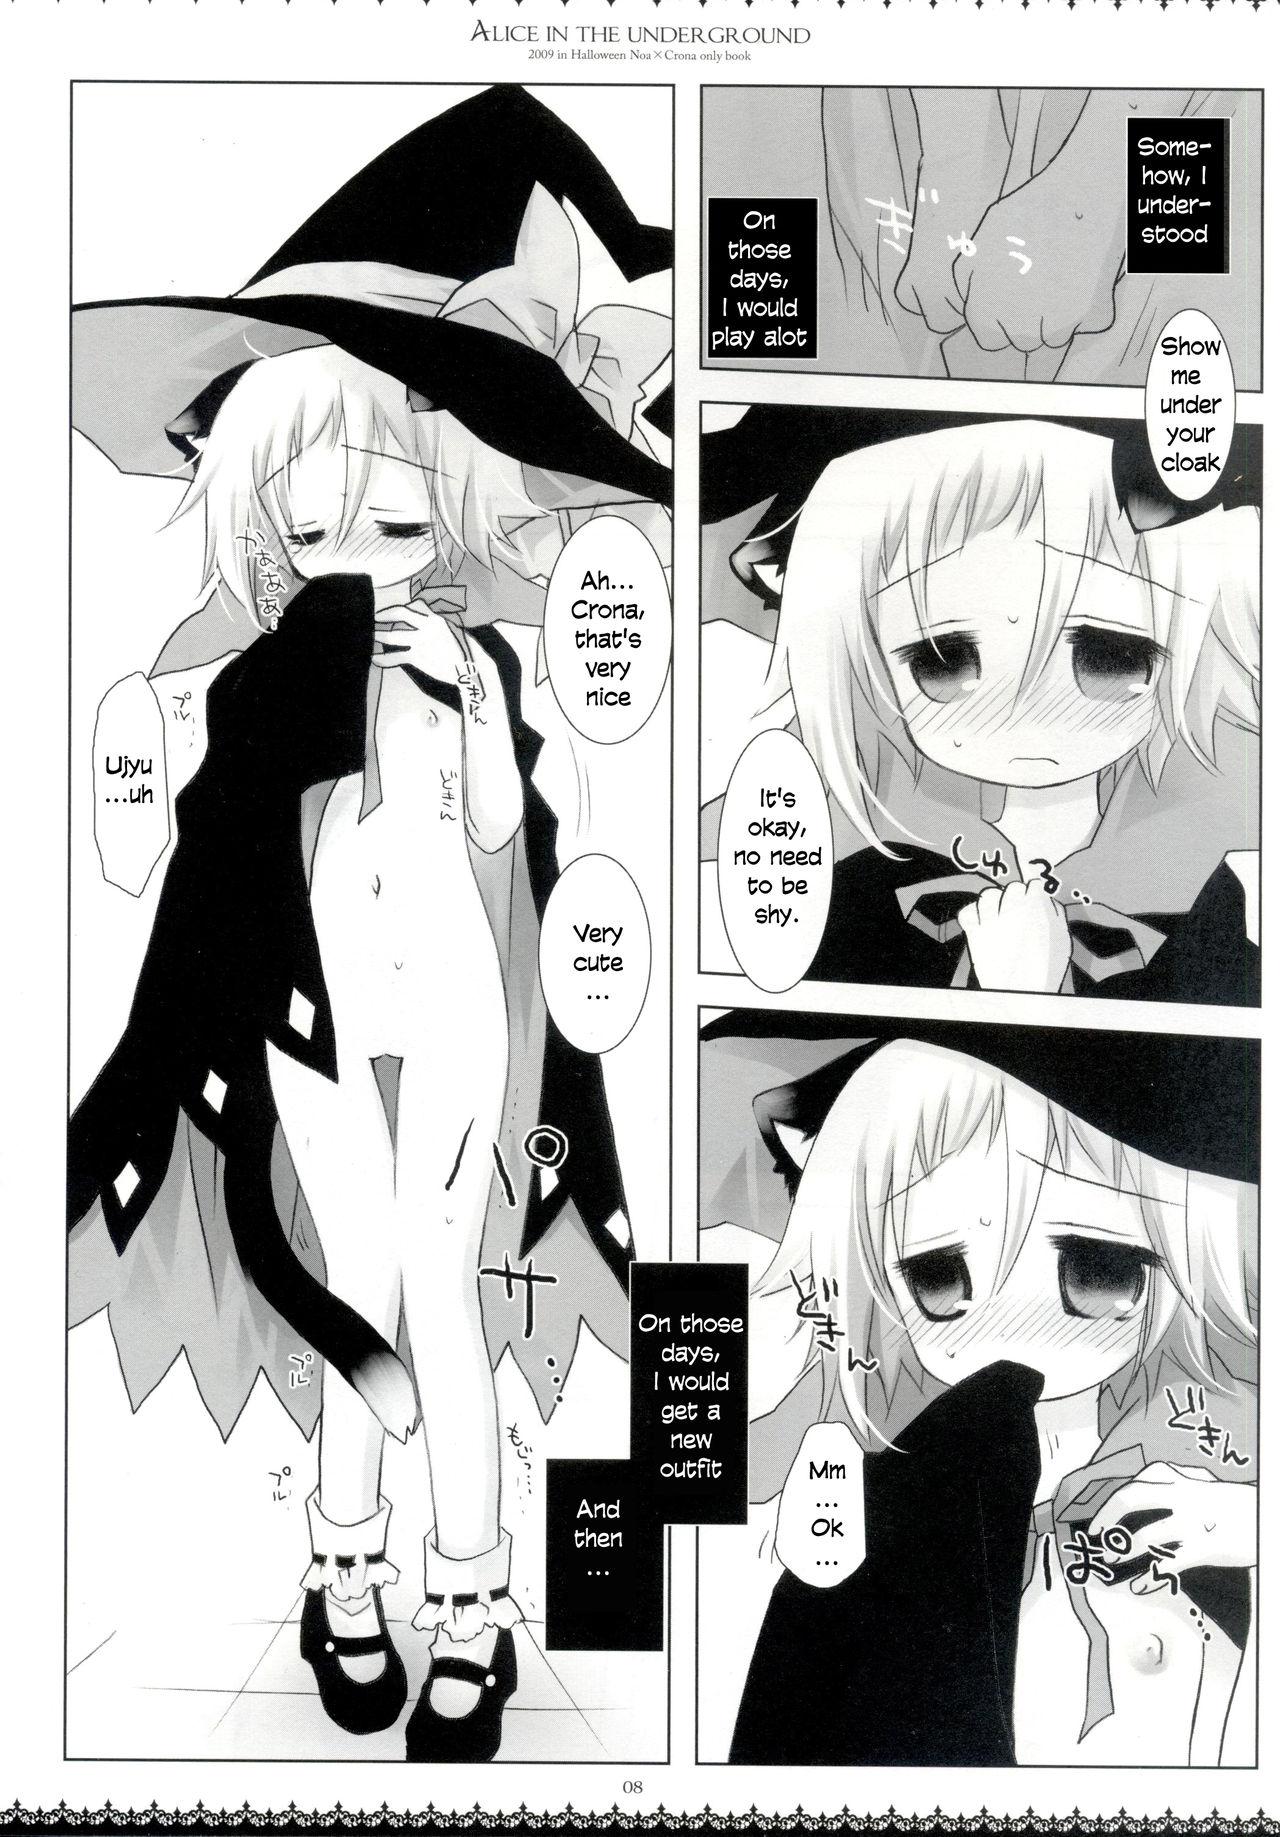 Classy Alice in the underground - Soul eater First - Page 7